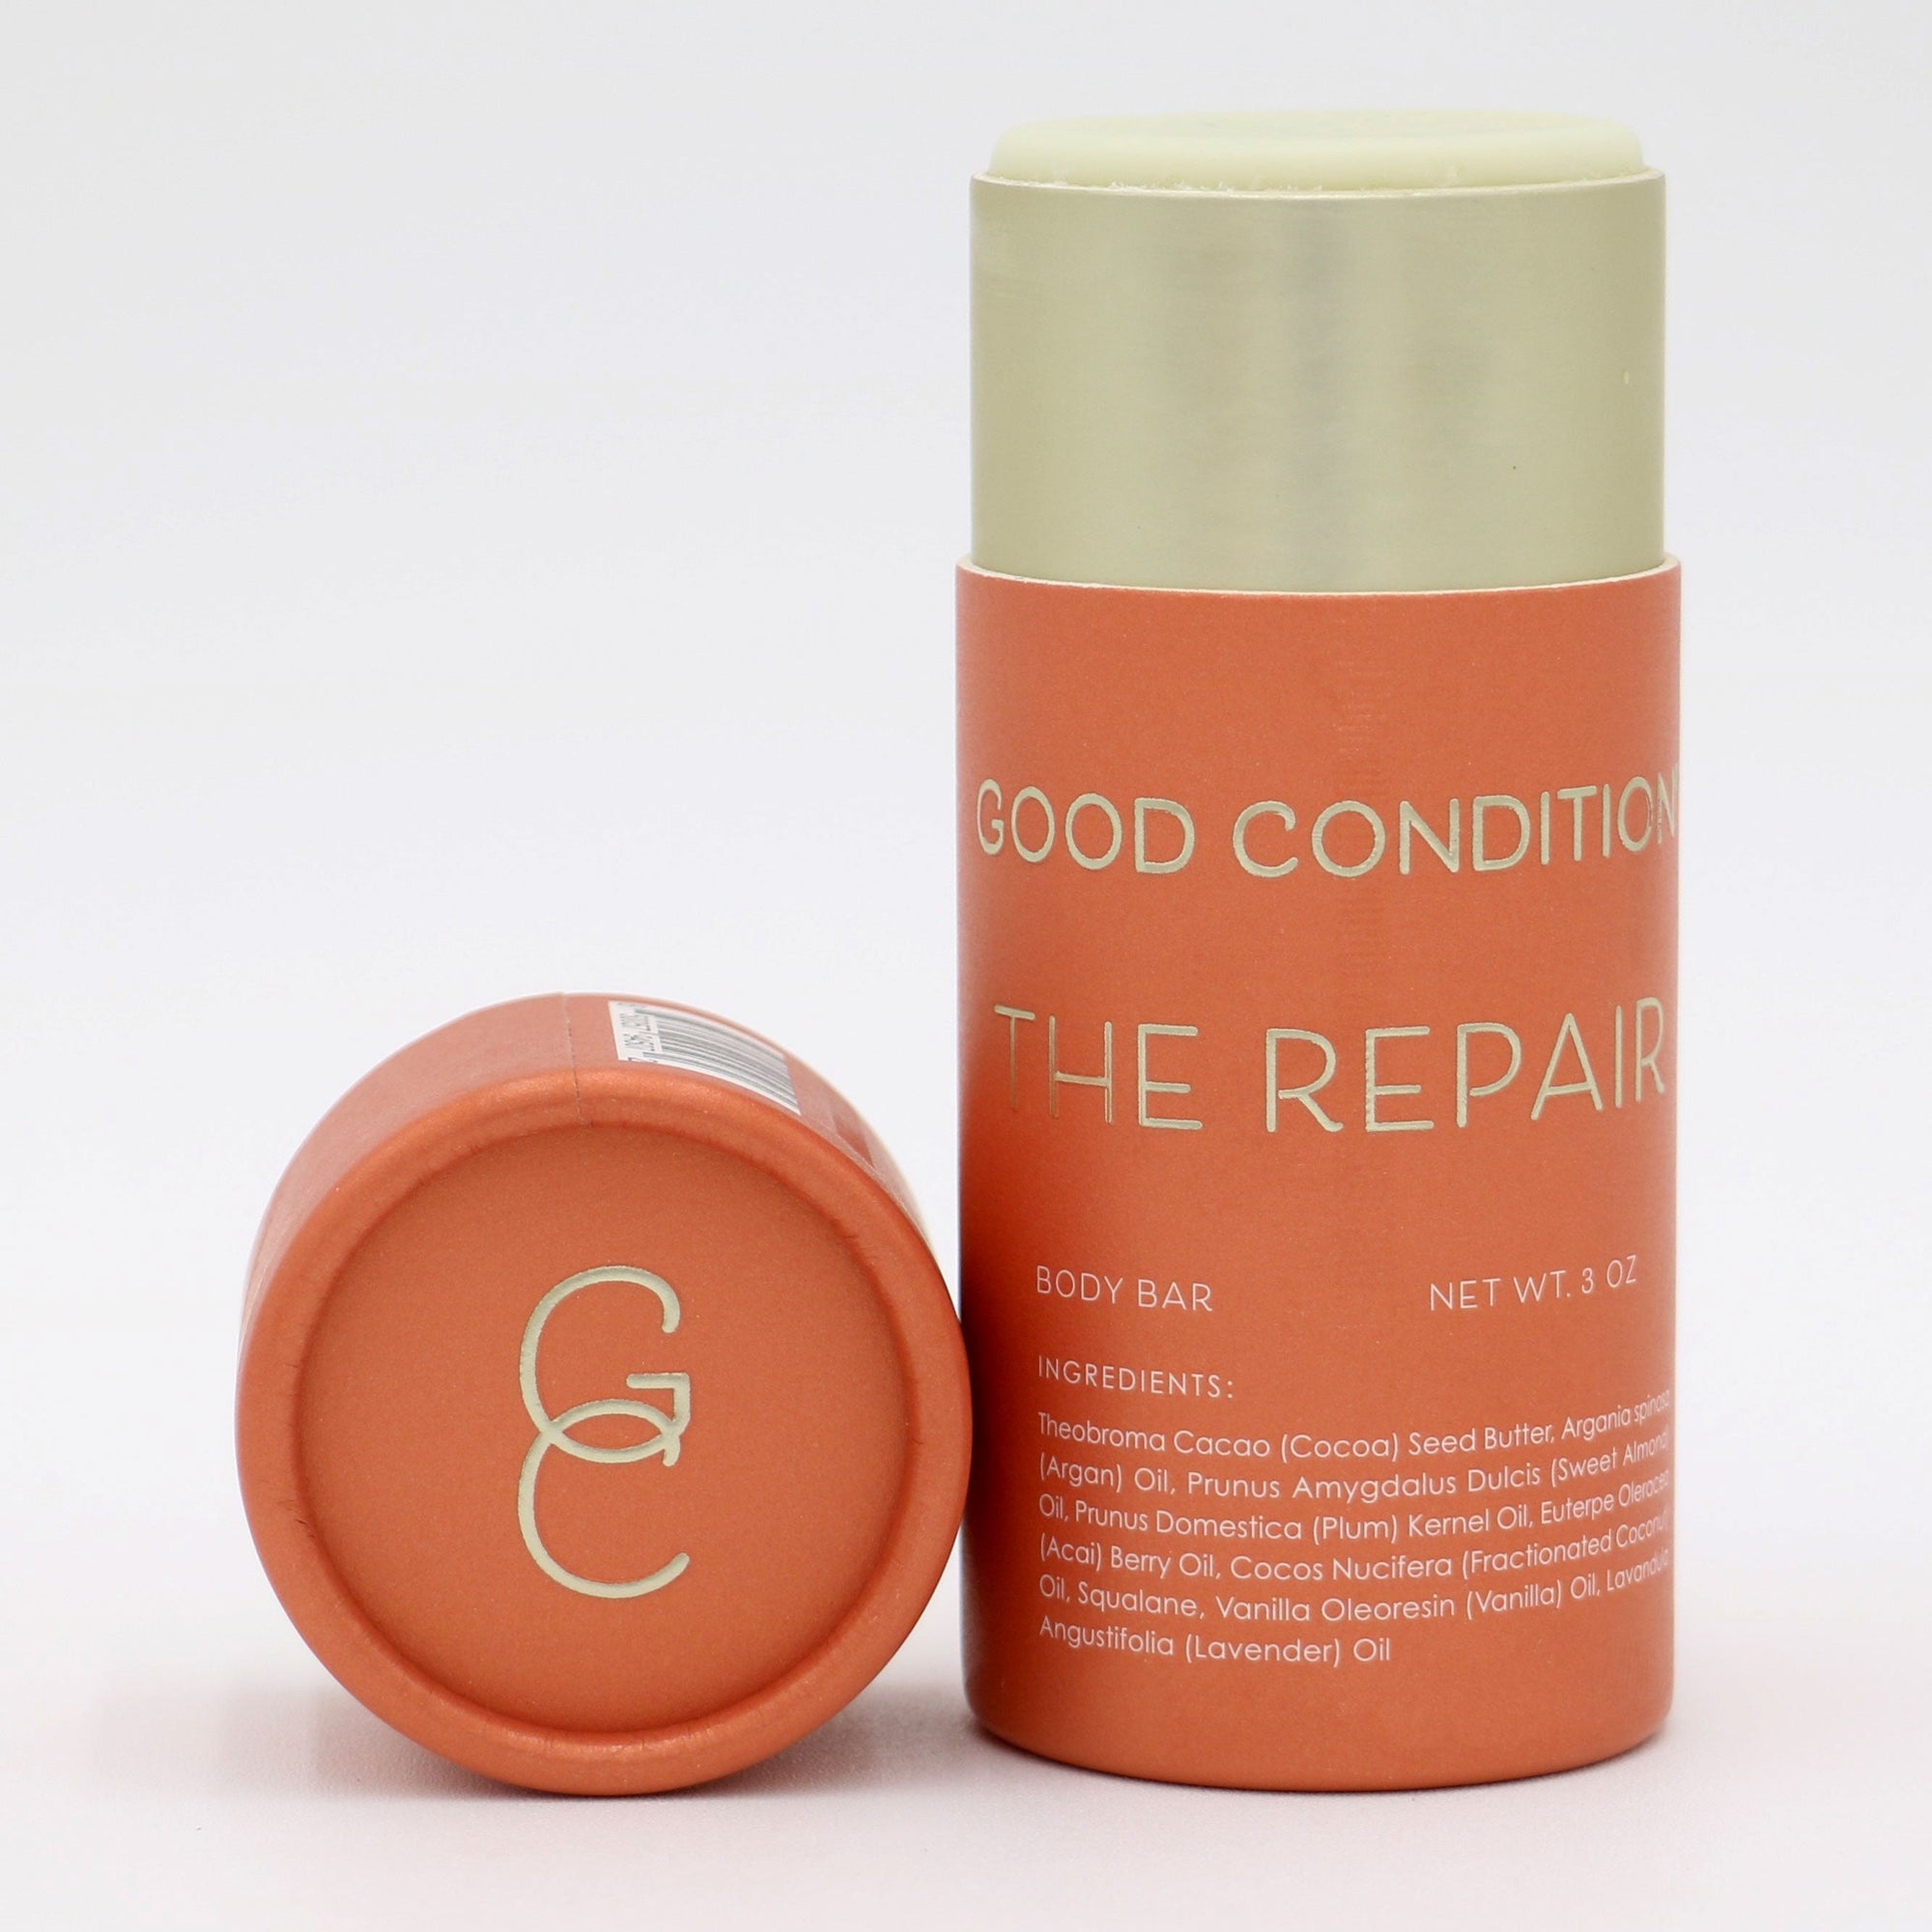 Good Condition The Repair nighttime regeneration organic waterless moisturizer tube. Featuring argan oil, acai berry oil, and squalane to restore suppleness and help neutralize damage caused by UV light. 